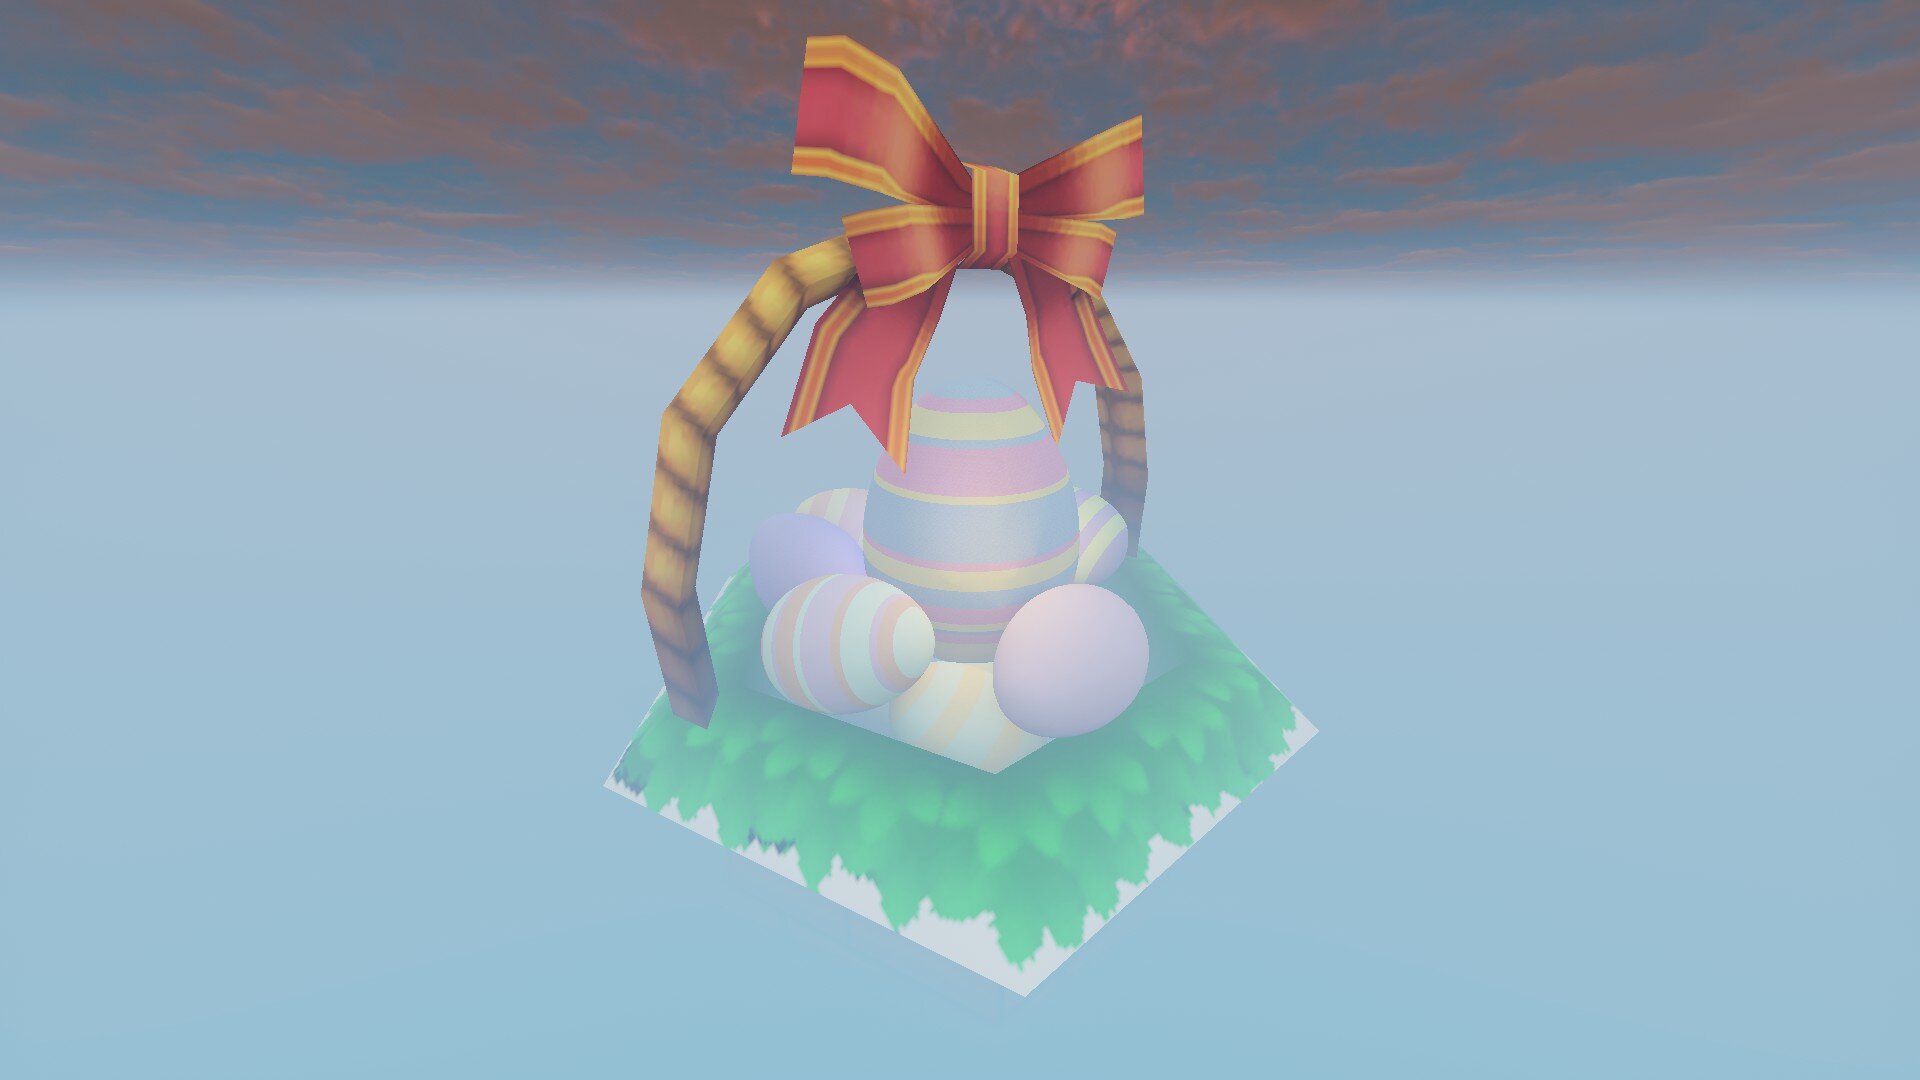 Giant Easter Egg Cover Image